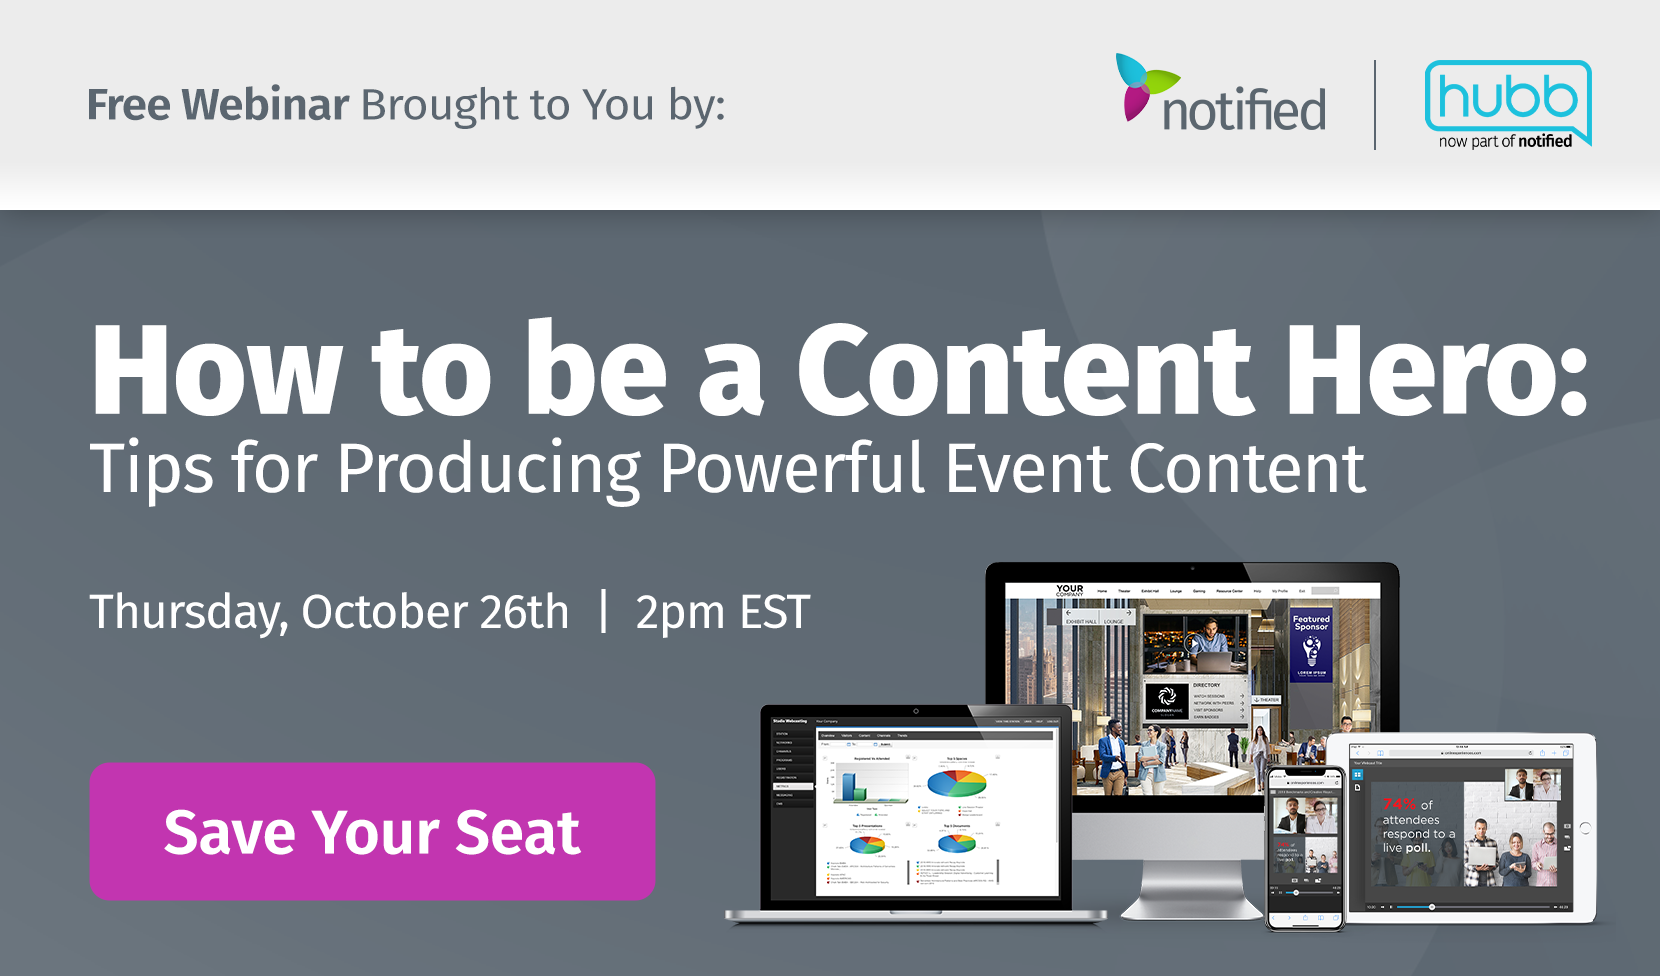 [Webinar] How to Be a Content Hero: Tips for Producing Powerful Event Content